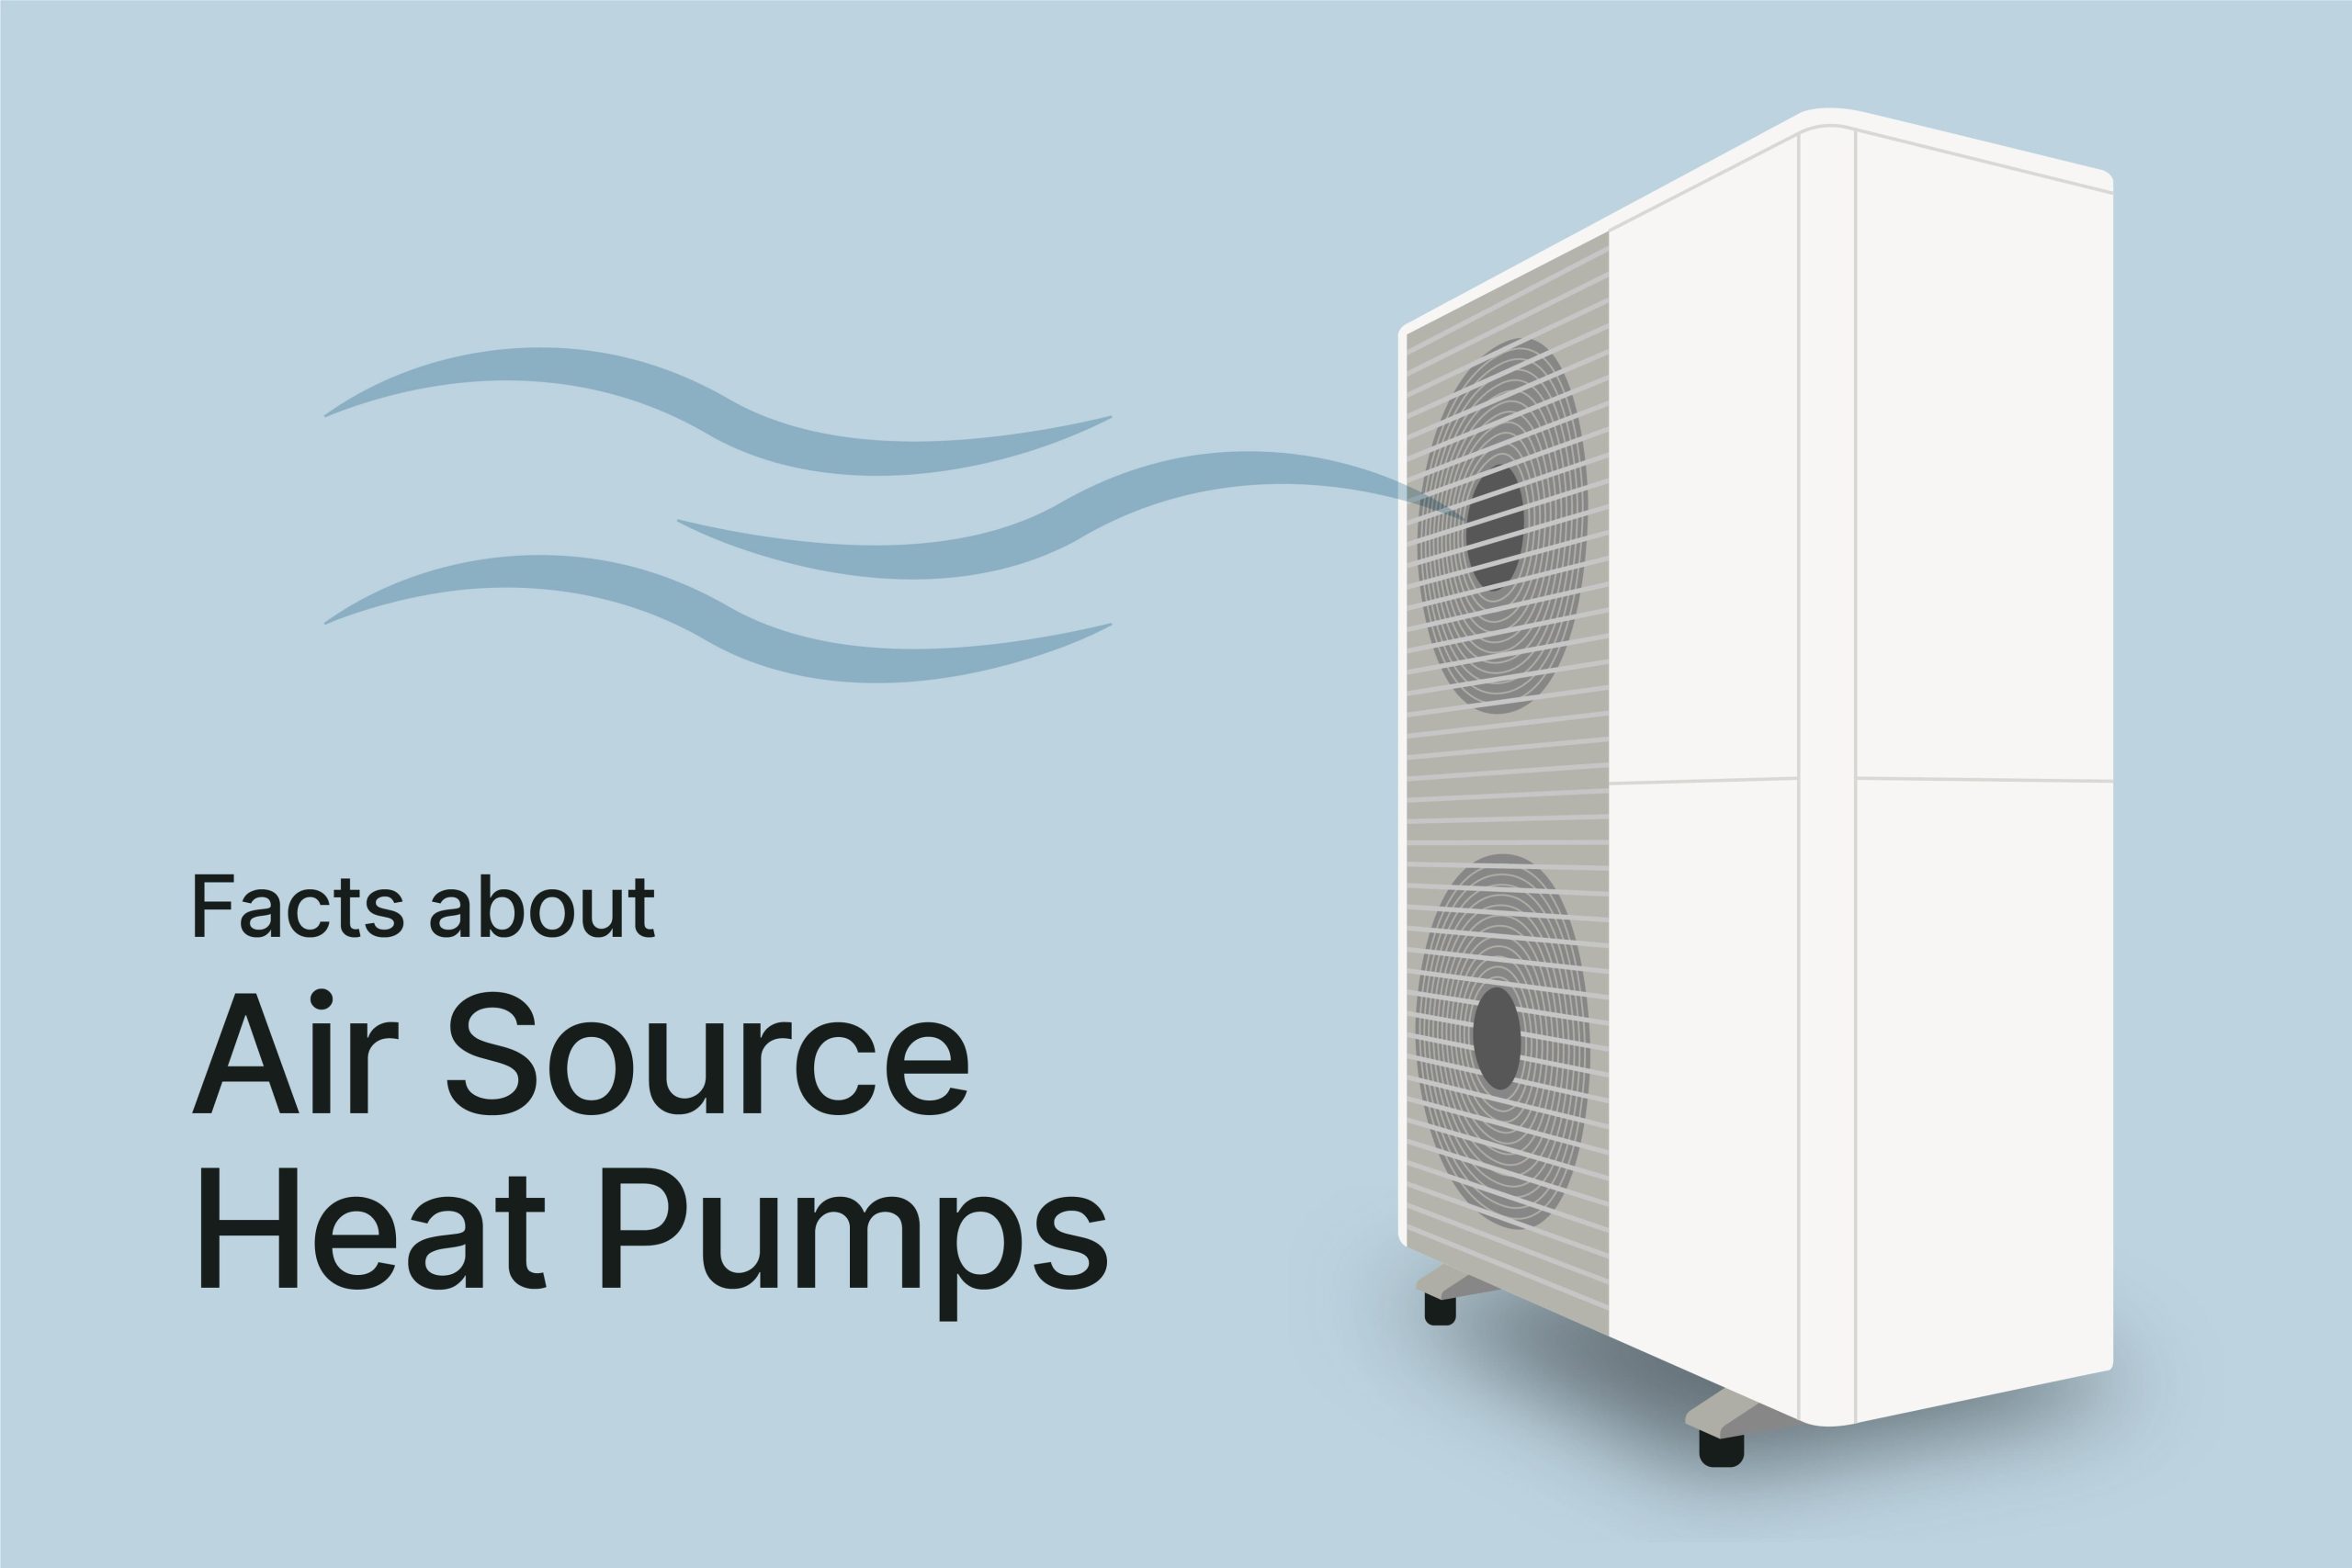 Facts on Air Source Heat Pumps